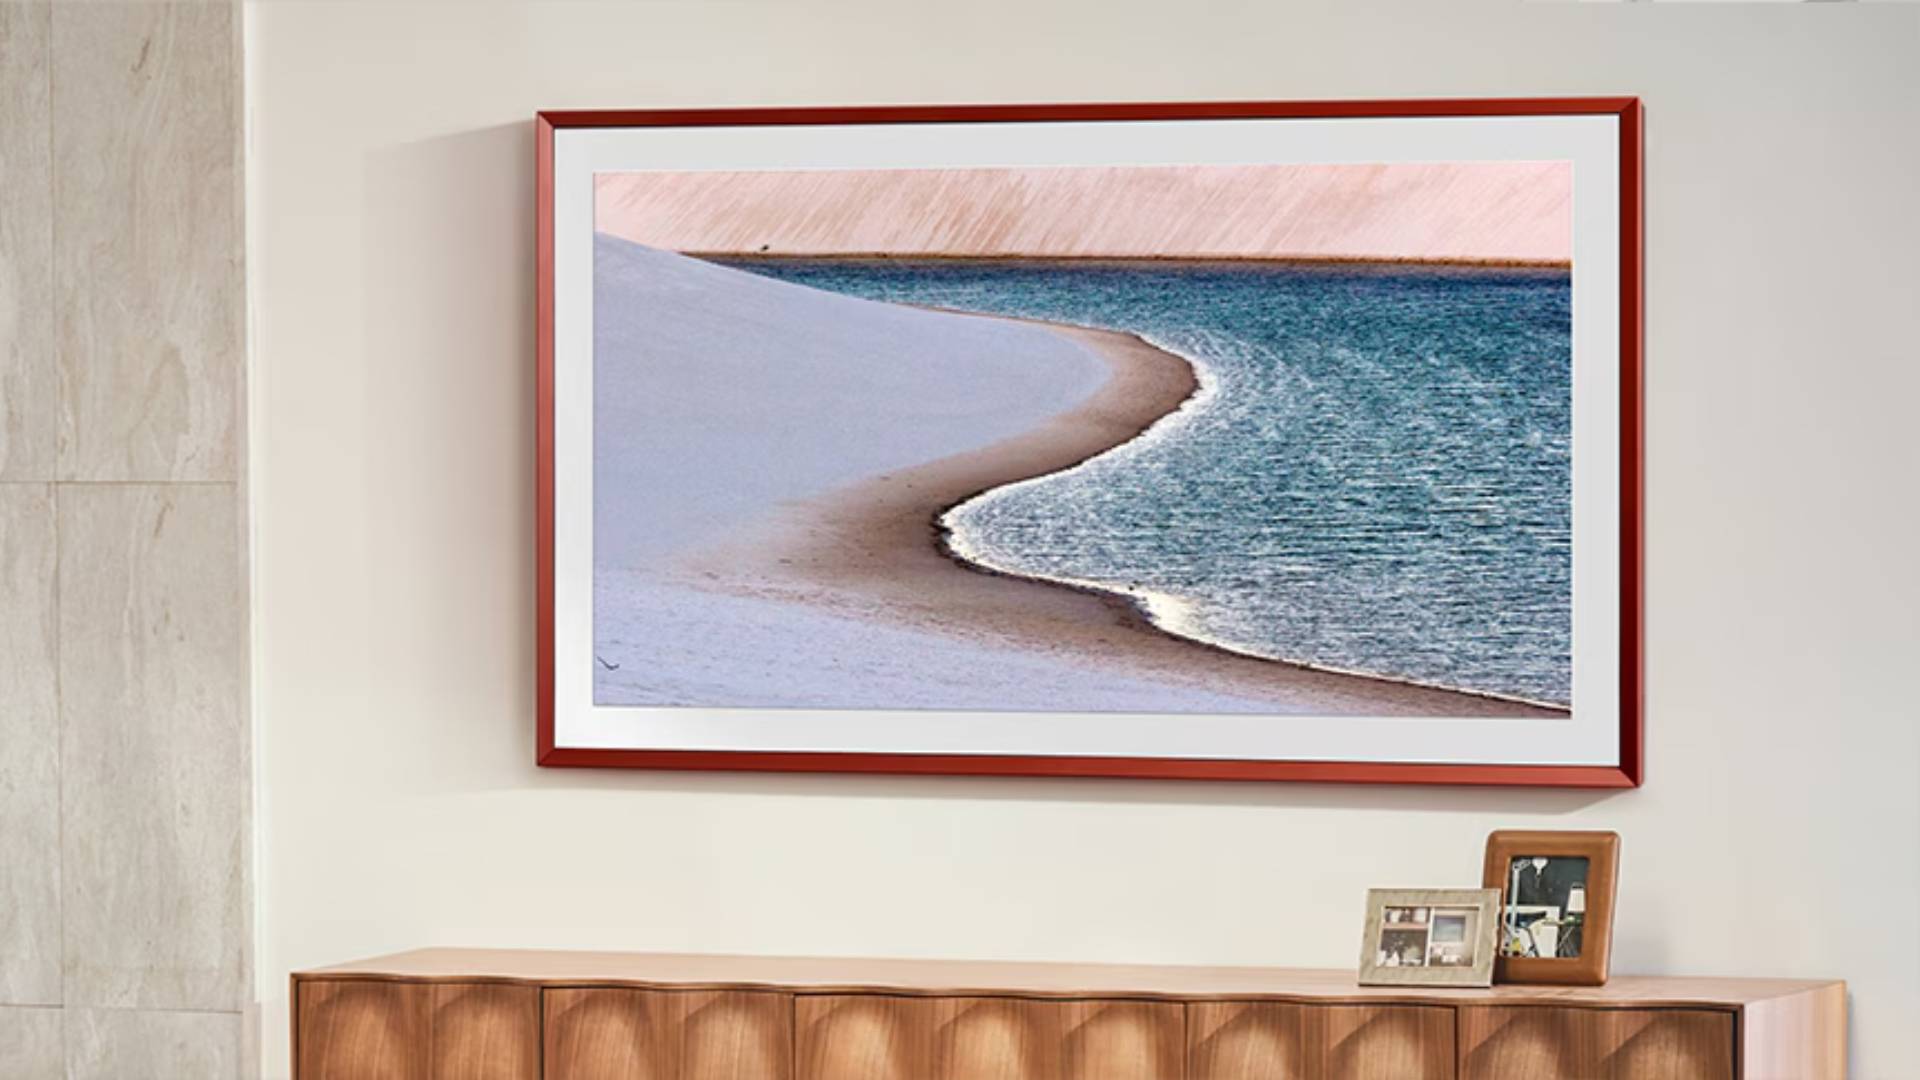 Samsung The Frame TV mounted to wall with beach on screen